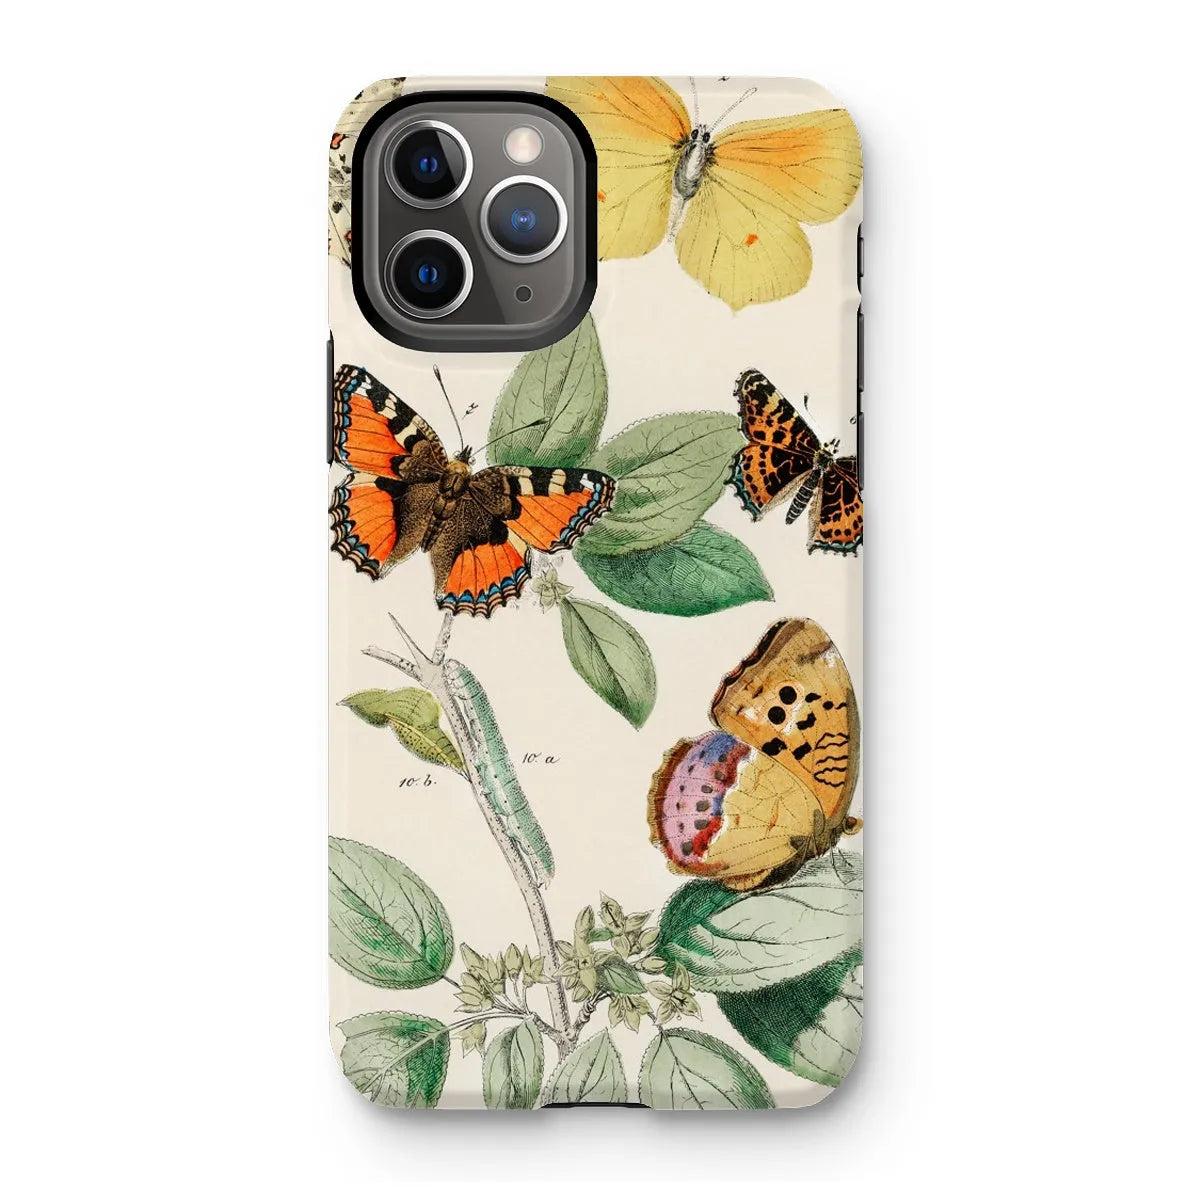 Butterfly Aesthetic Art Phone Case - William Forsell Kirby - Iphone 11 Pro / Matte - Mobile Phone Cases - Aesthetic Art